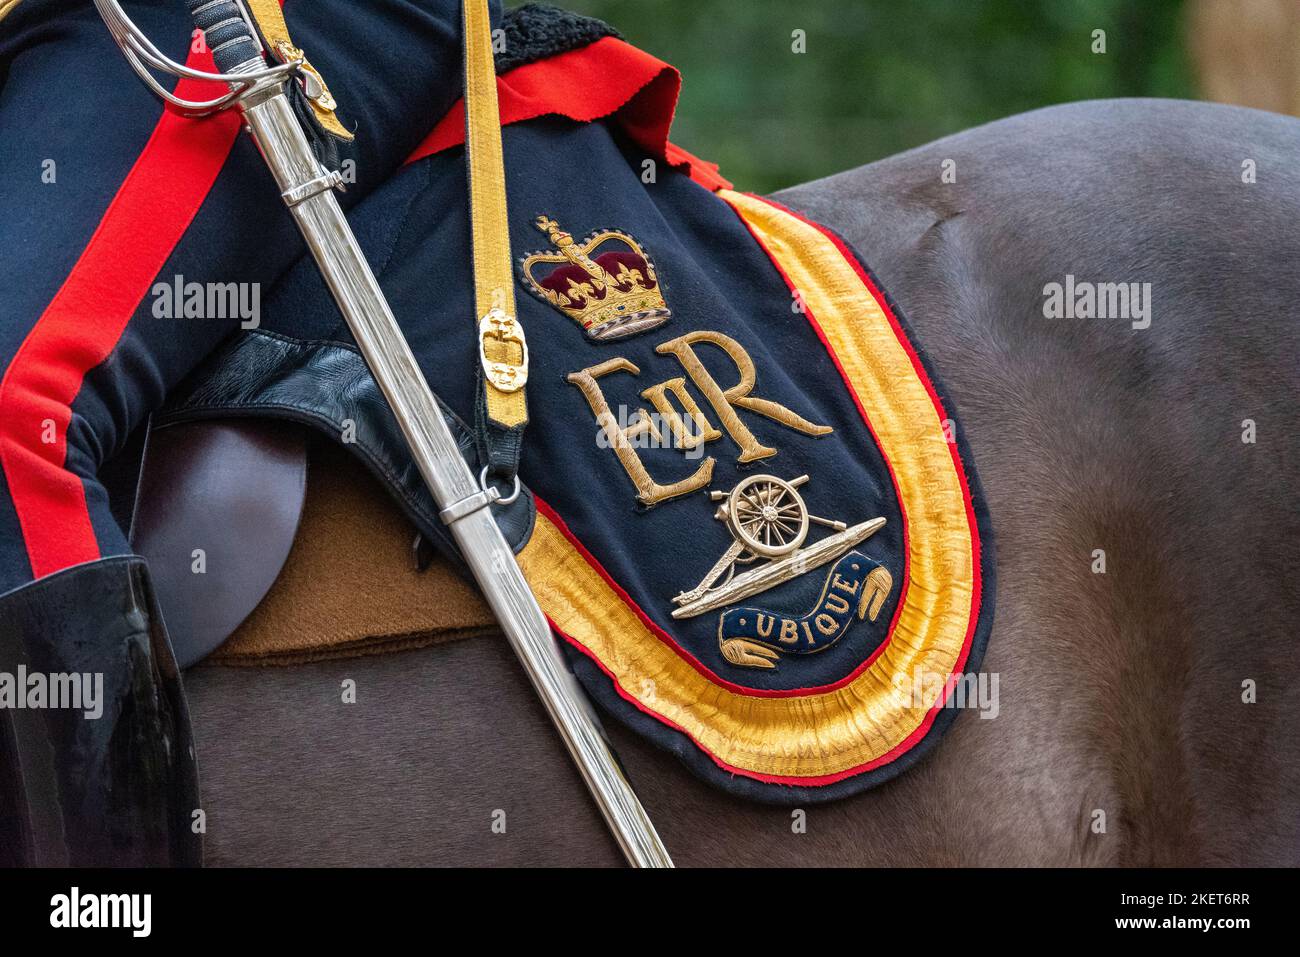 Green Park, Westminster, London, UK. 14th Nov, 2022. A 41-gun salute took place in Green Park to mark King Charles III's 74th birthday by the King's Troop Royal Horse Artillery (KTRHA), the first such ceremony since Charles became King. Saddle blanker with EiiR sypher Stock Photo